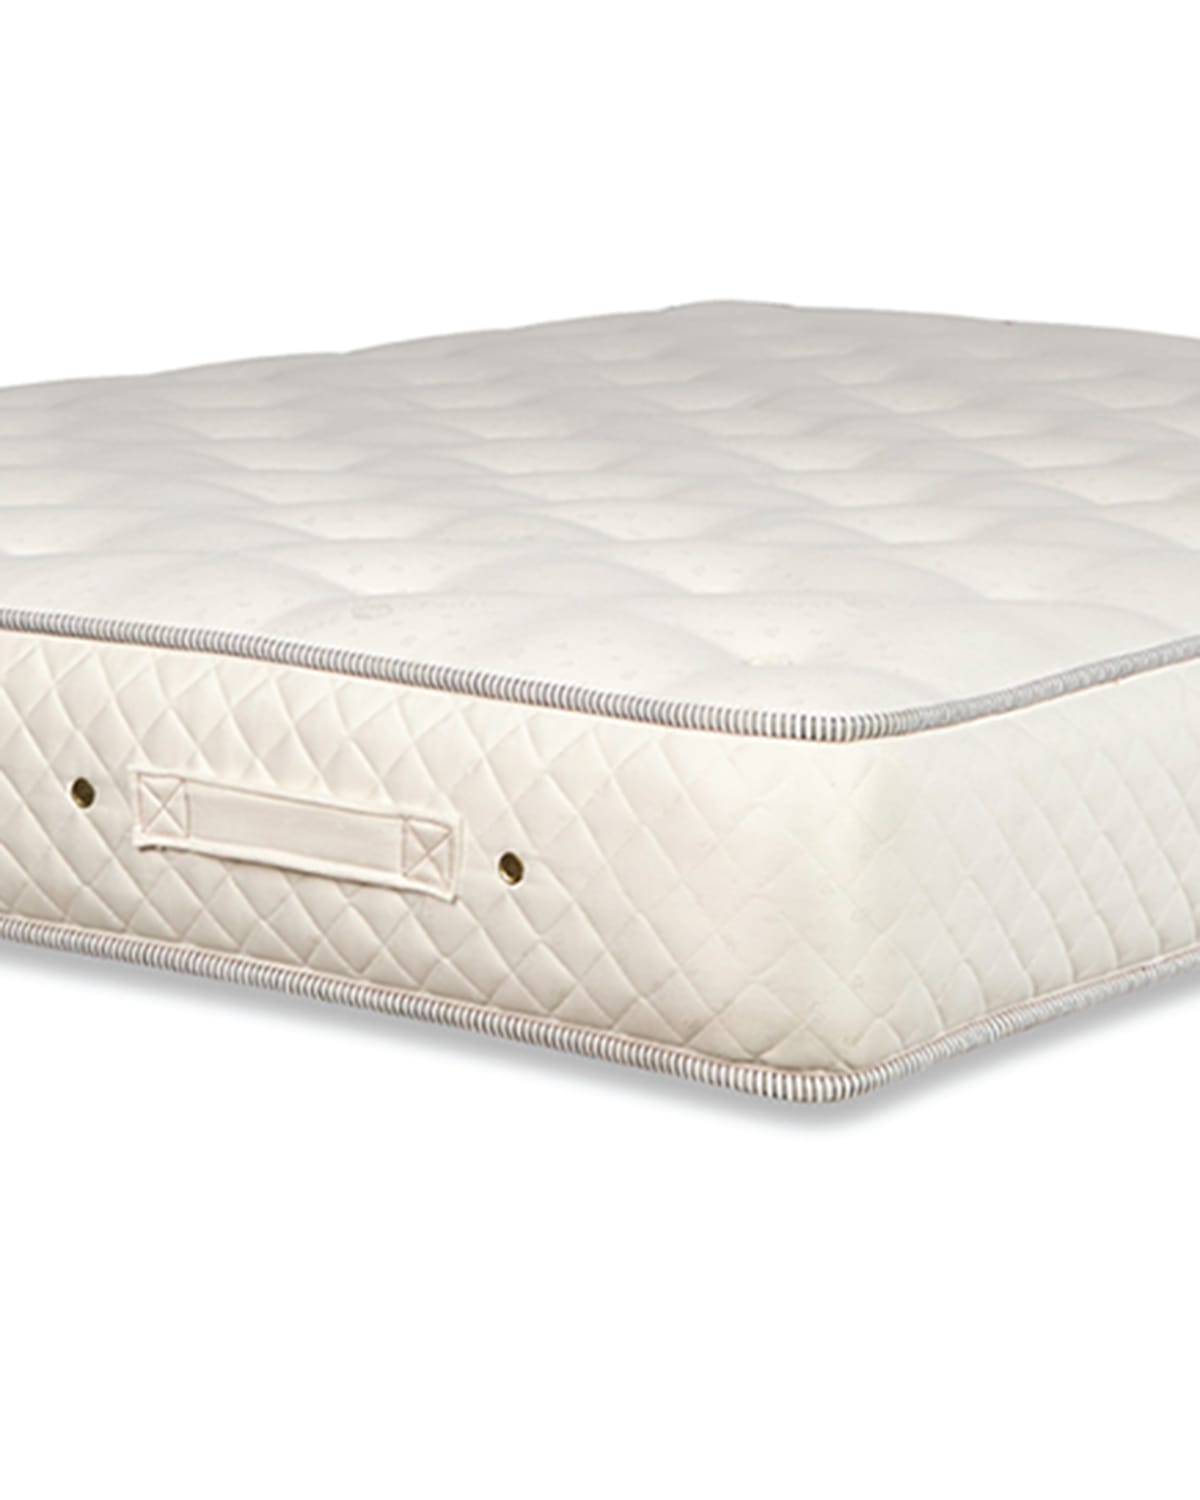 Royal-pedic Dream Spring Limited Firm Twin Xl Mattress In White